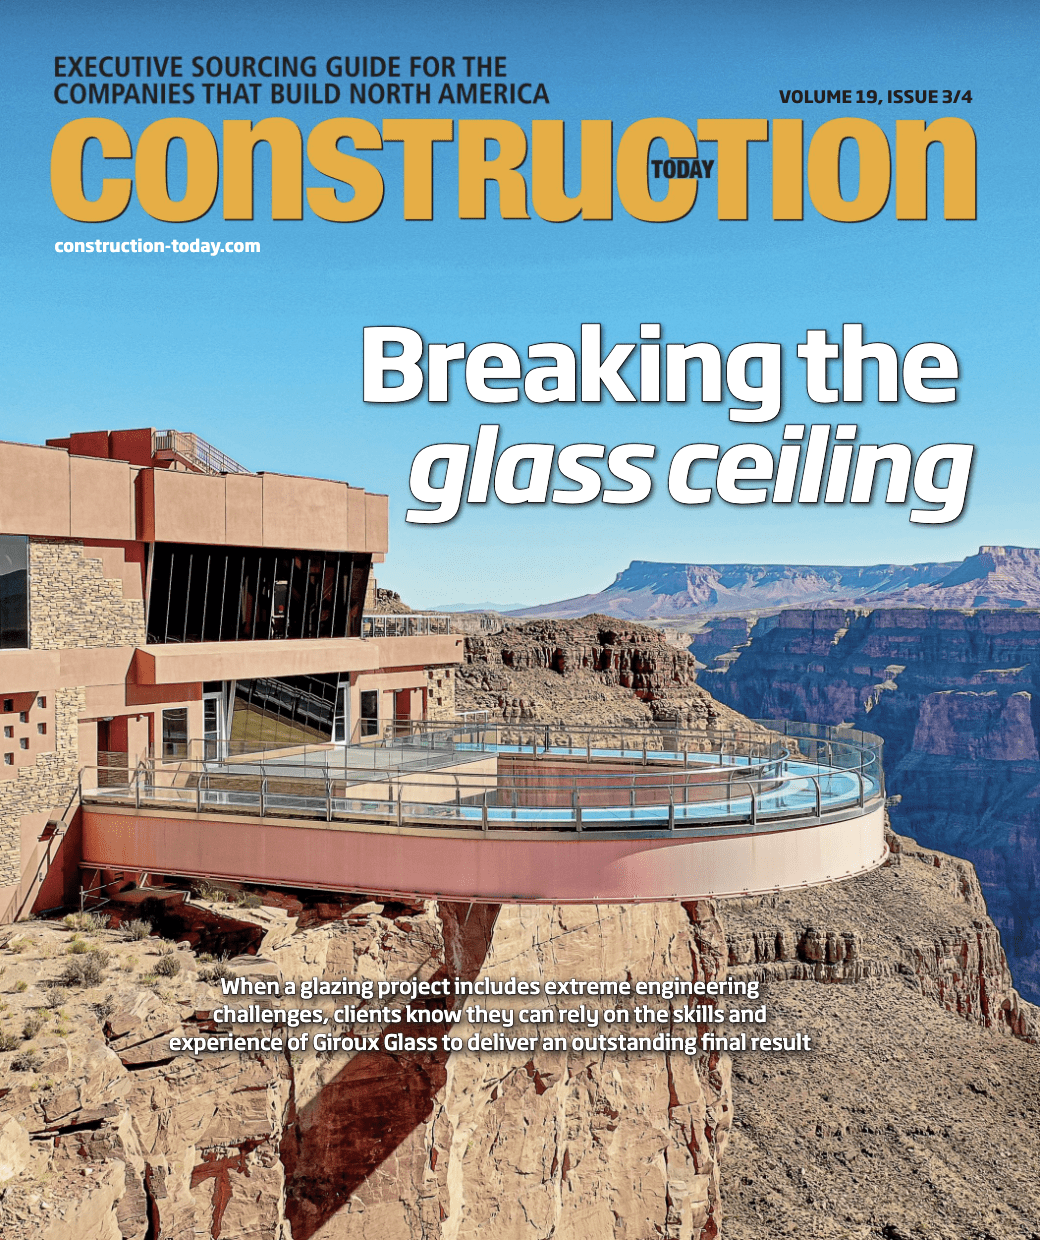 Breaking the Glass Ceiling: Giroux Glass Cover Story in Construction Today